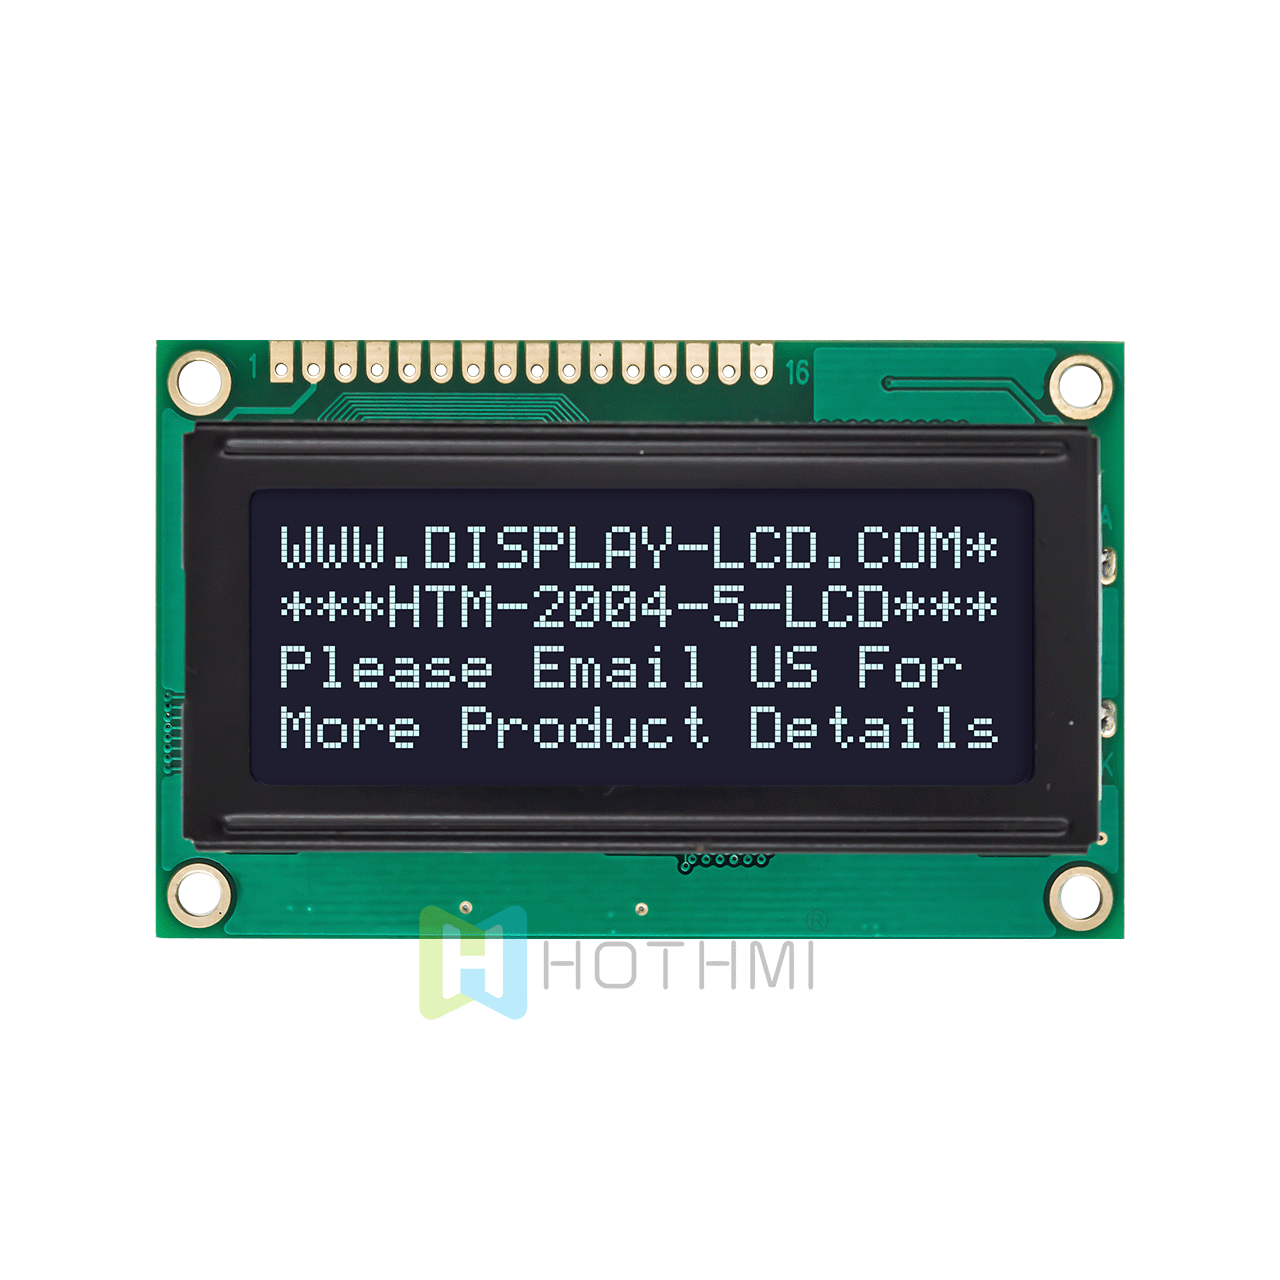 4x20 character LCD | DSTN- monochrome display | with white backlight | white text on black background | 5.0V | Arduino | st7066u